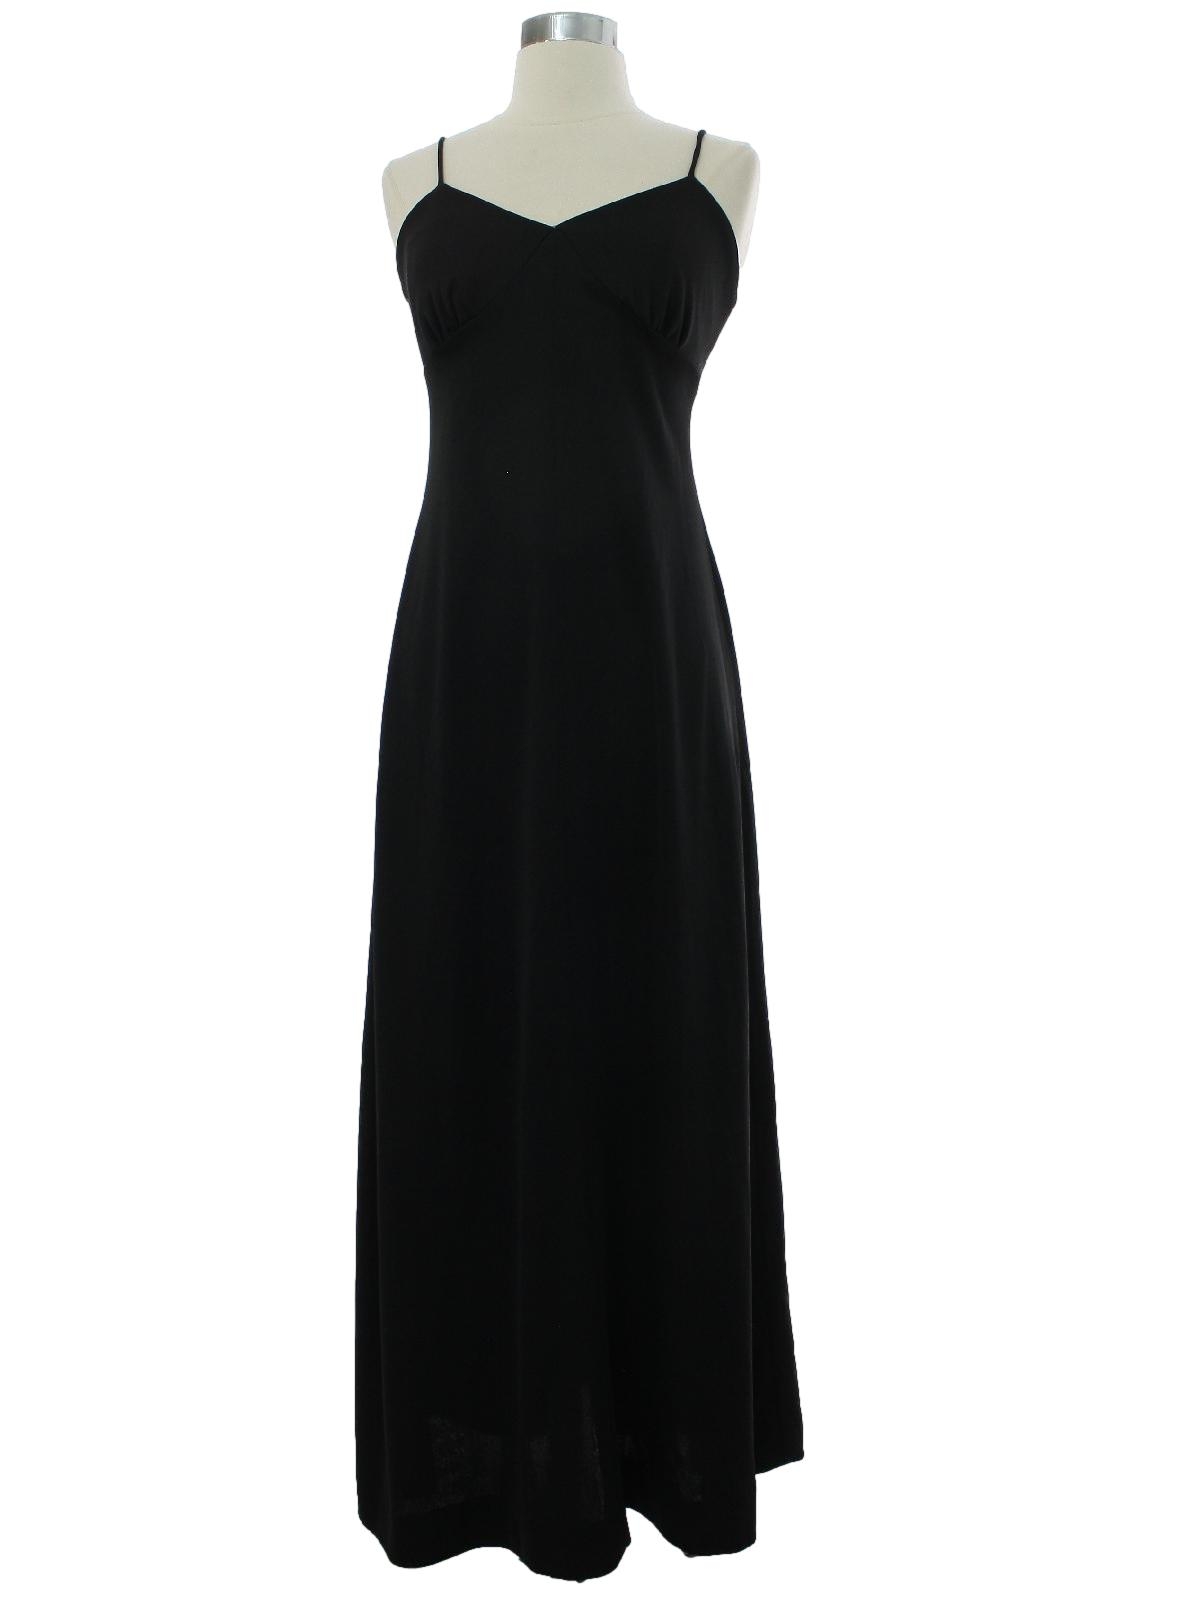 1980's Dress: 80s -No Label- Womens black slinky polyester spaghetti strap  sleeveless a-line maxi dress. Veed neckline, fitted stretchy bodice, a-line  waist. Classic style, ruched bust. Zipper back closure.